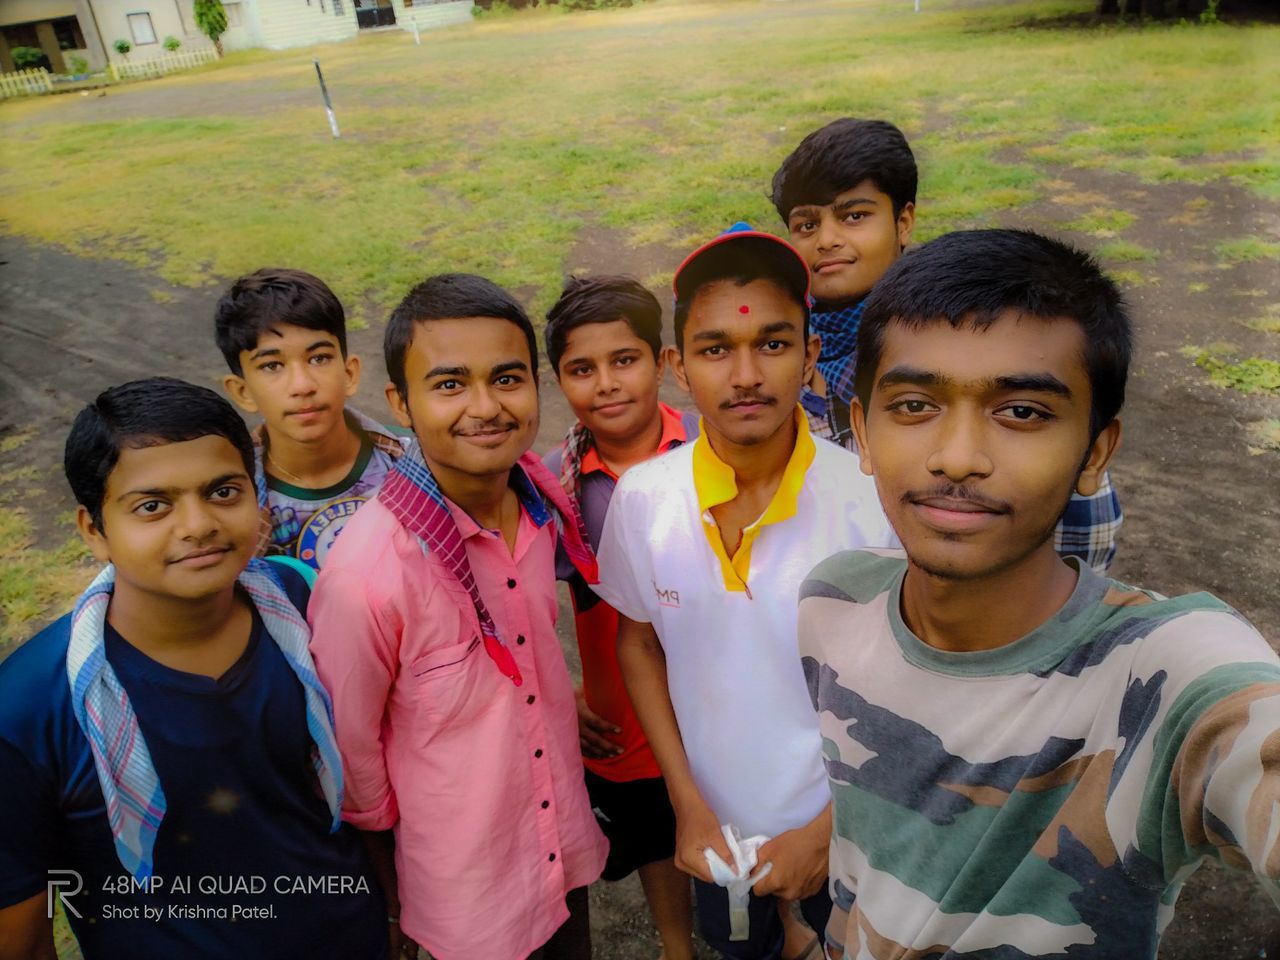 looking at camera, portrait, group of people, youth, child, men, childhood, social group, togetherness, smiling, teenager, friendship, female, human face, women, emotion, education, adult, person, sports, adolescence, happiness, lifestyles, student, young adult, standing, pre-adolescent child, clothing, day, waist up